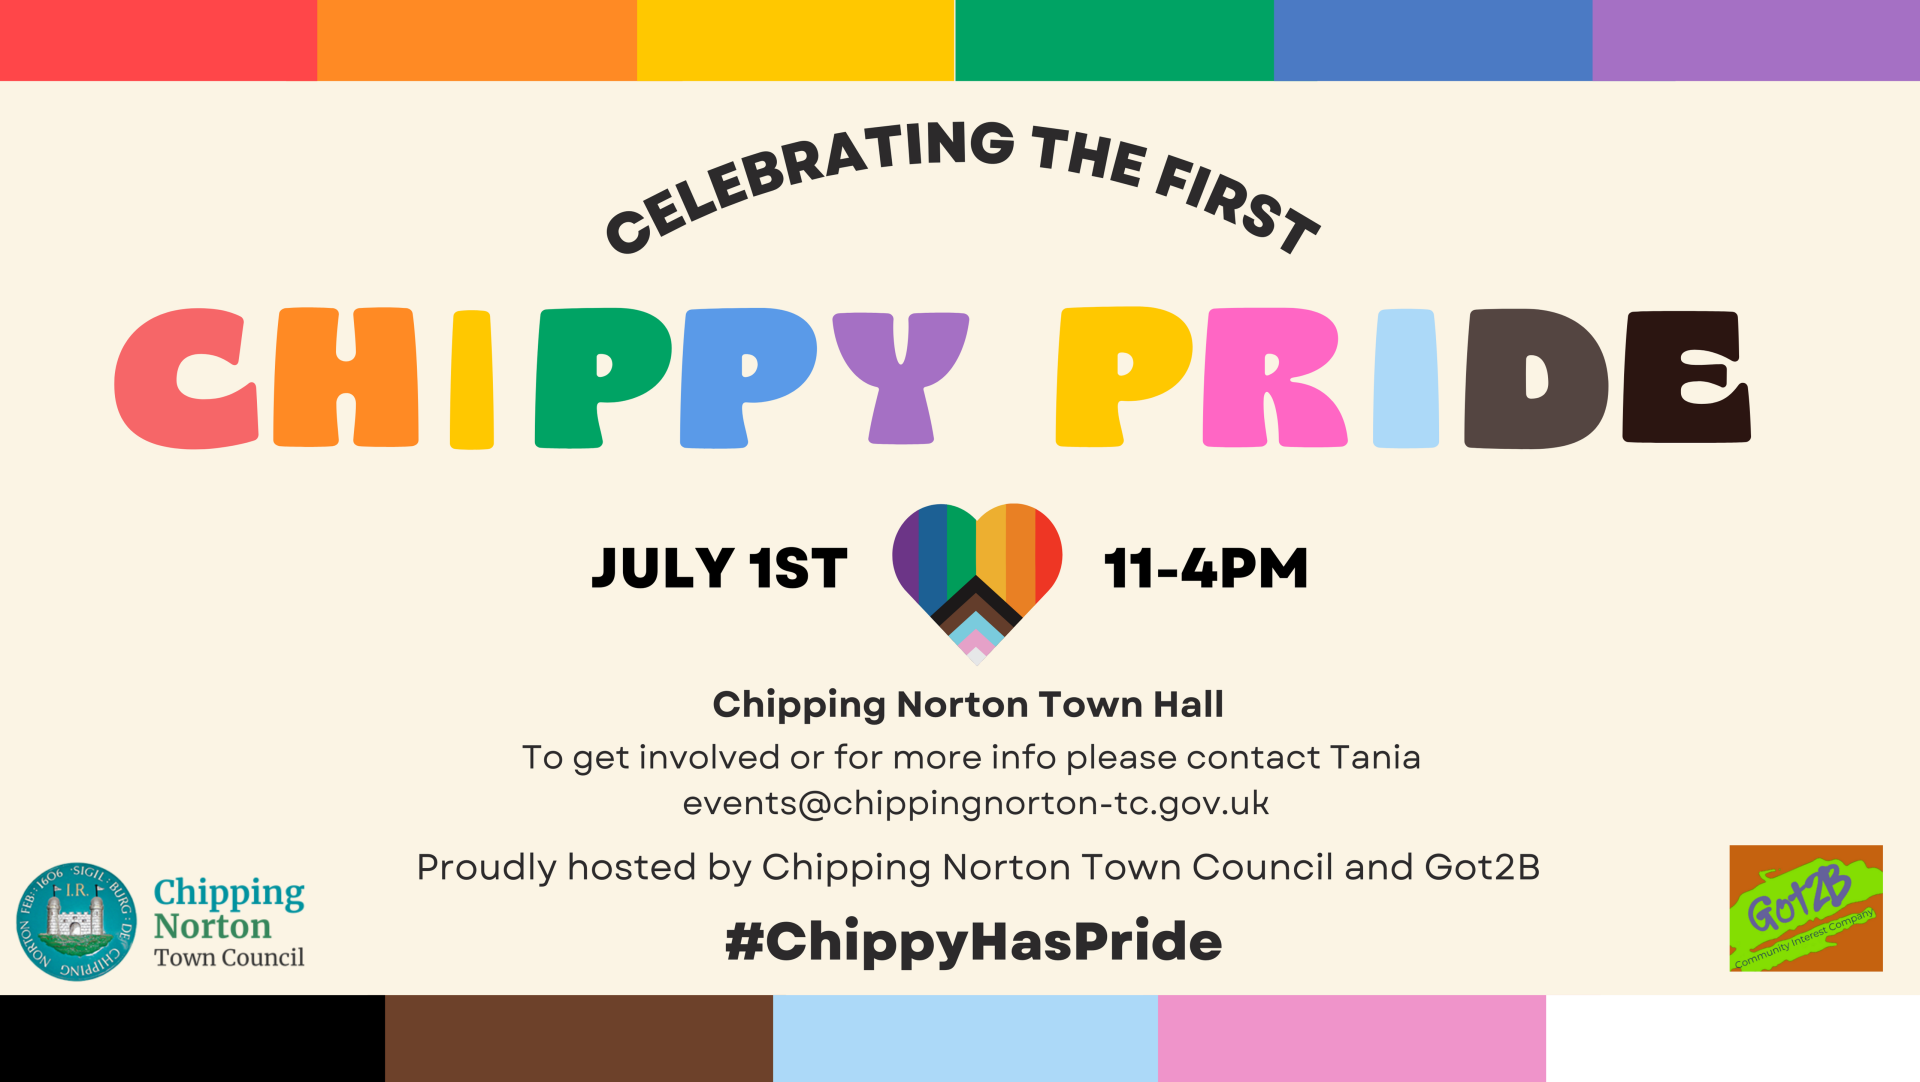 Celebrating the first Chippy Pride 
July 1st 11-4pm
Chipping Norton Town Hall
To get involved or for more info please contact Tania  events@chippingnorton-tc.gov.uk
